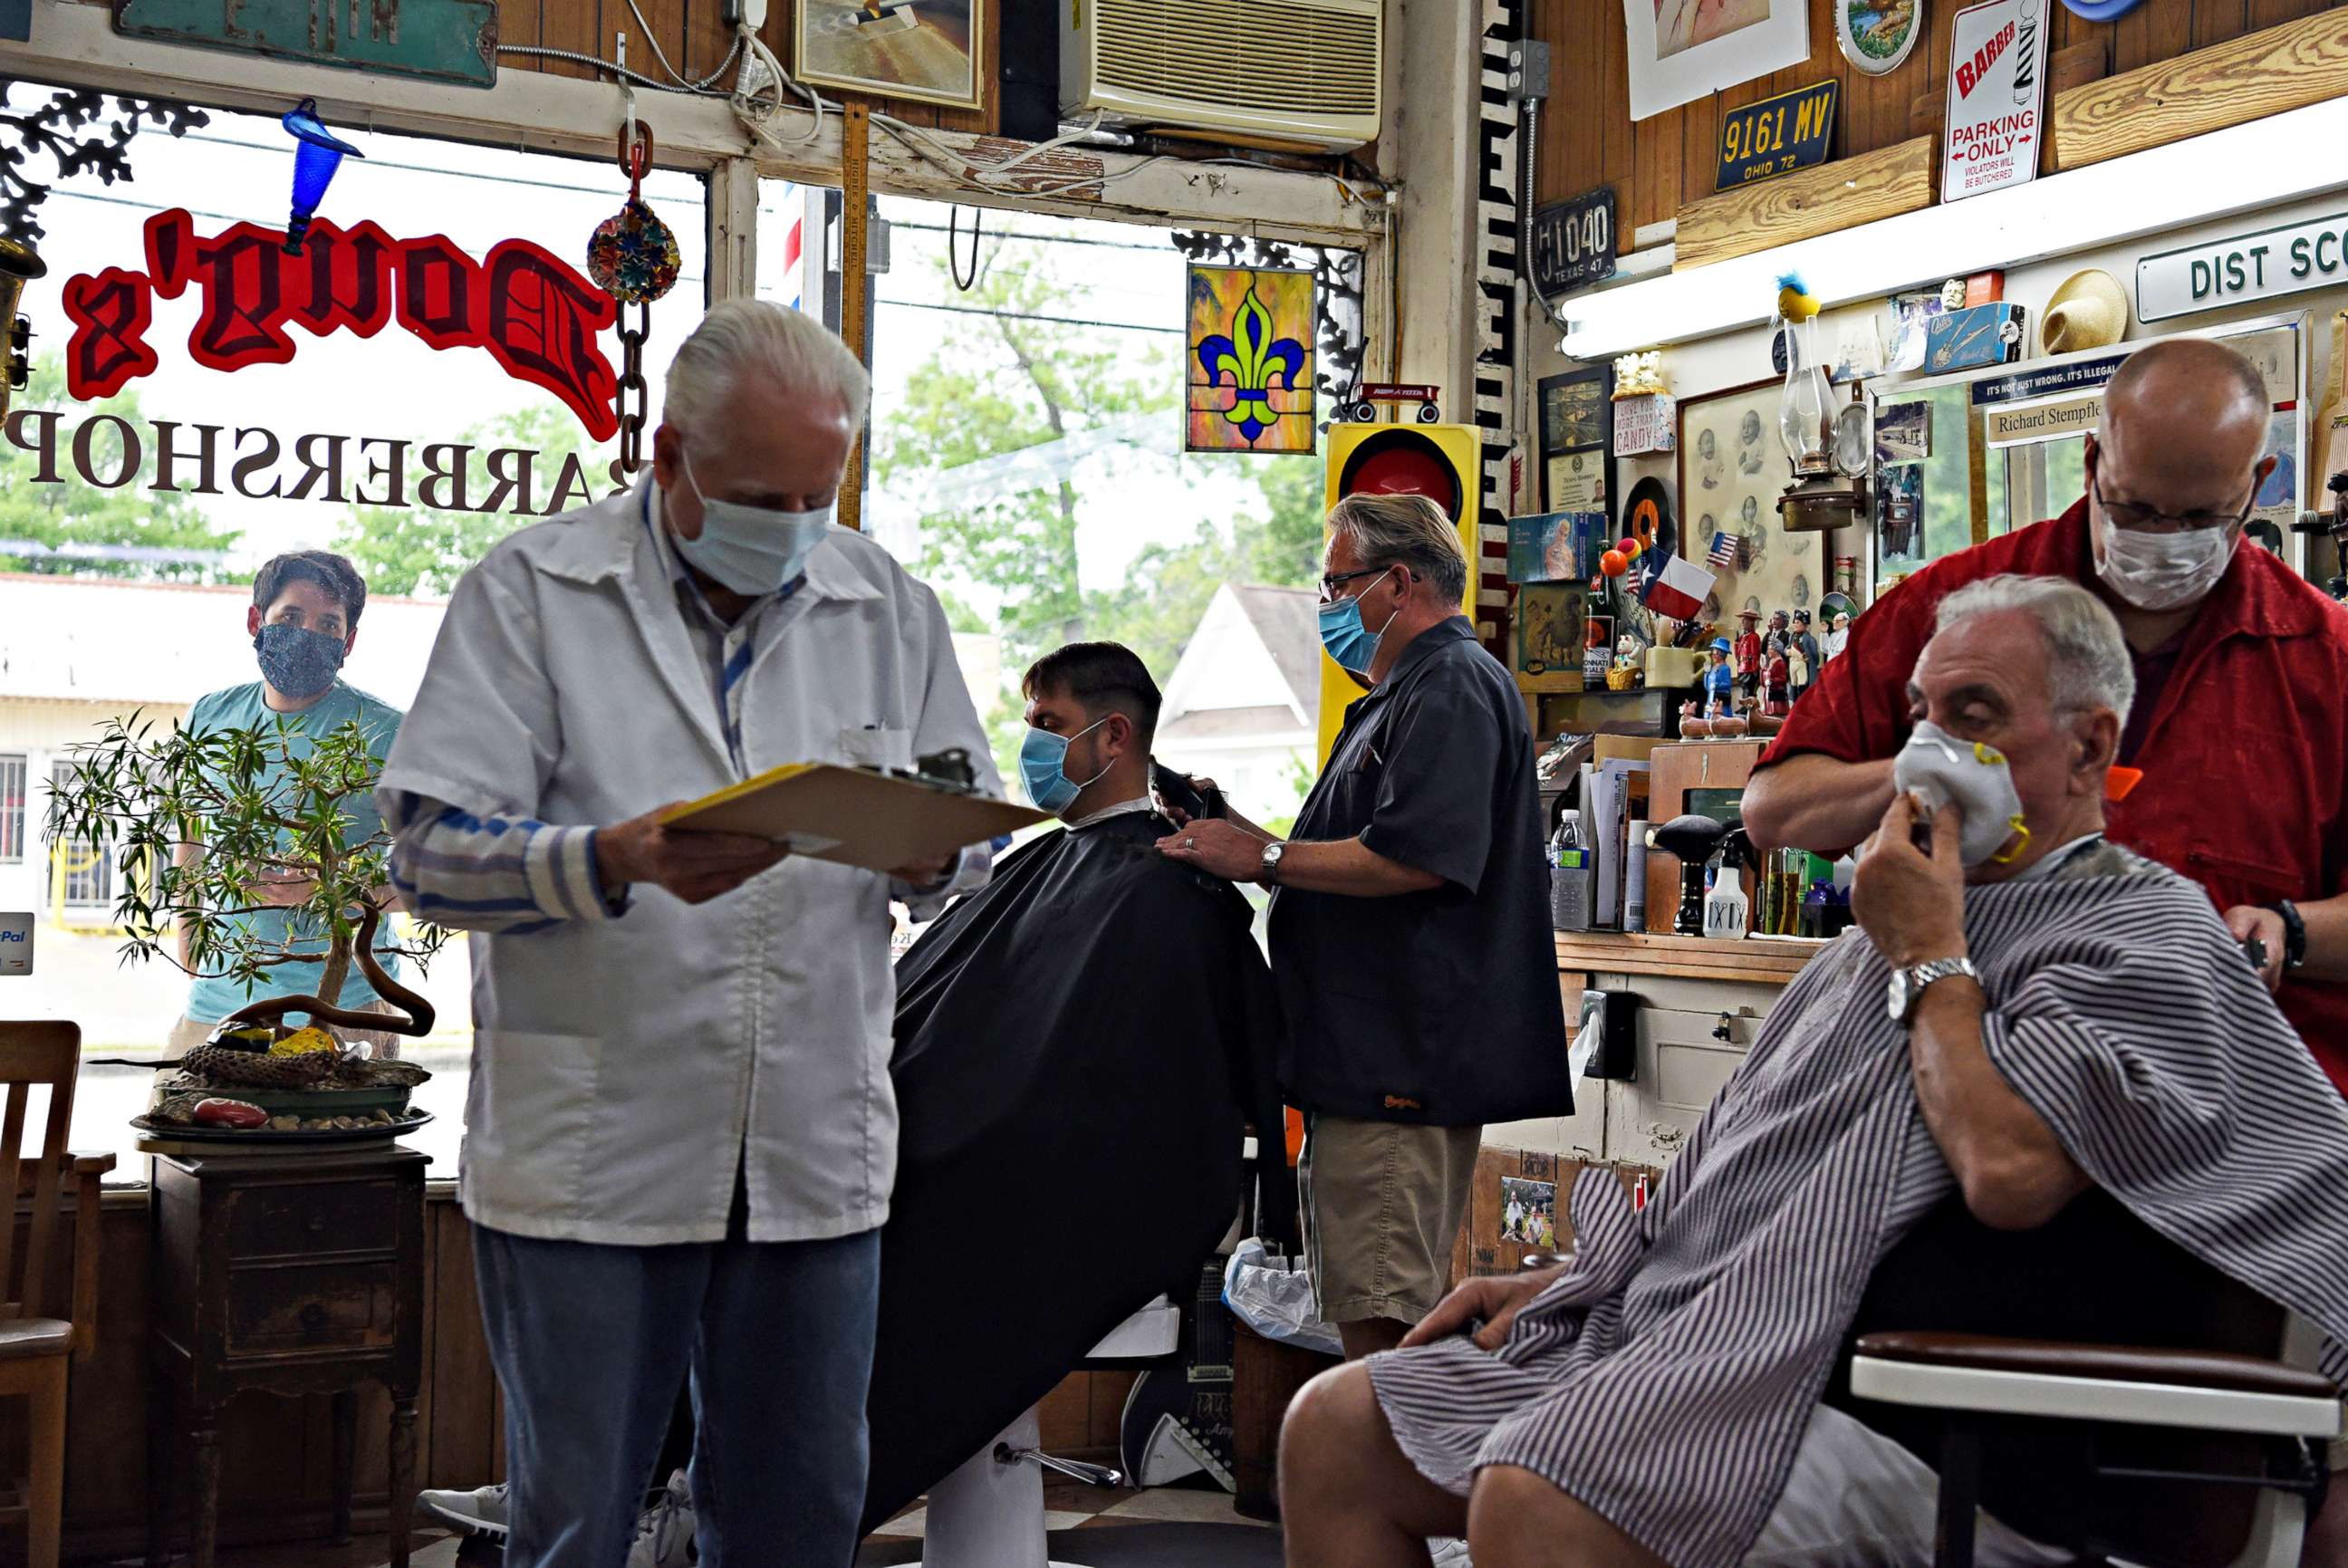 PHOTO: Men receive haircuts as social distancing guidelines to curb the spread of the coronavirus disease (COVID-19) are relaxed at Doug's Barber Shop in Houston, Texas, May 8, 2020.